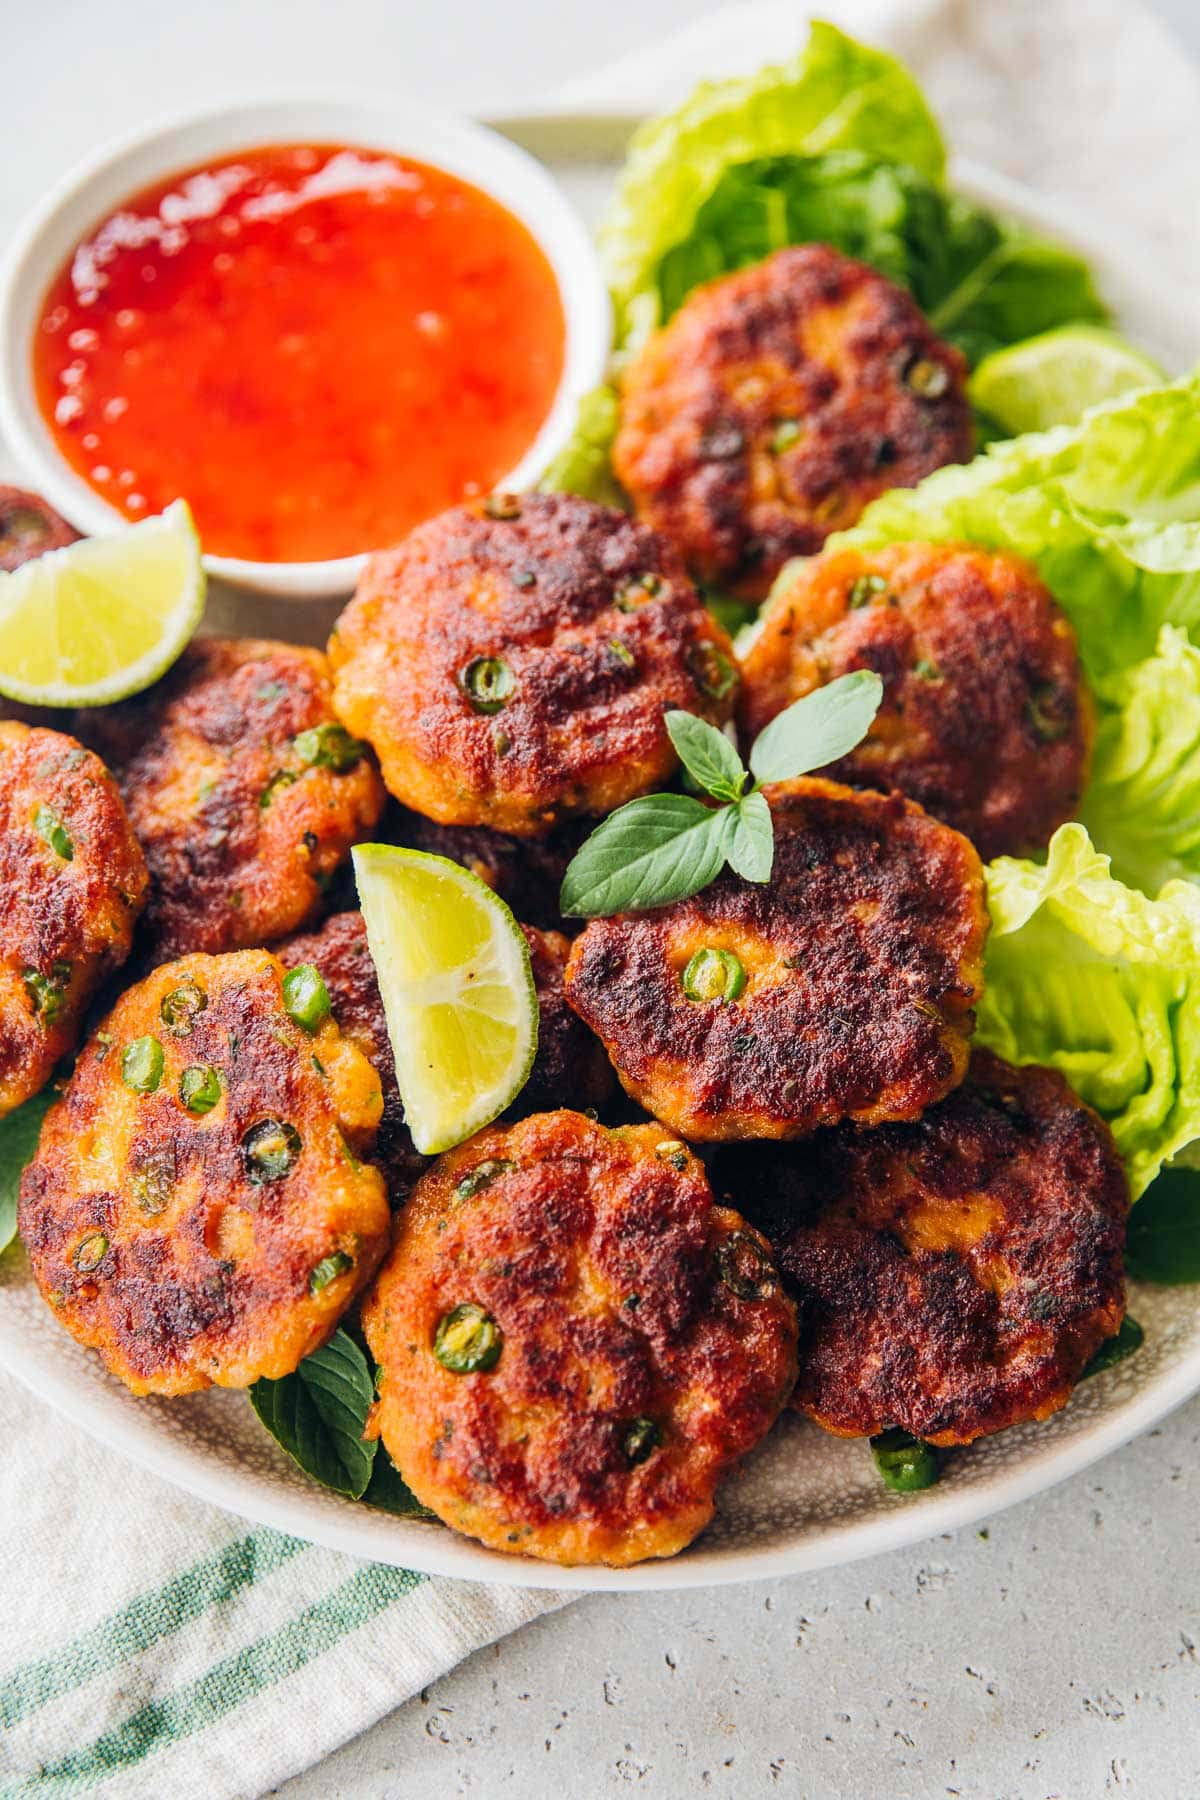 Delicious Thai Fish Cakes served with sweet chilli sauce, lime wedges and Cos lettuce leaves.